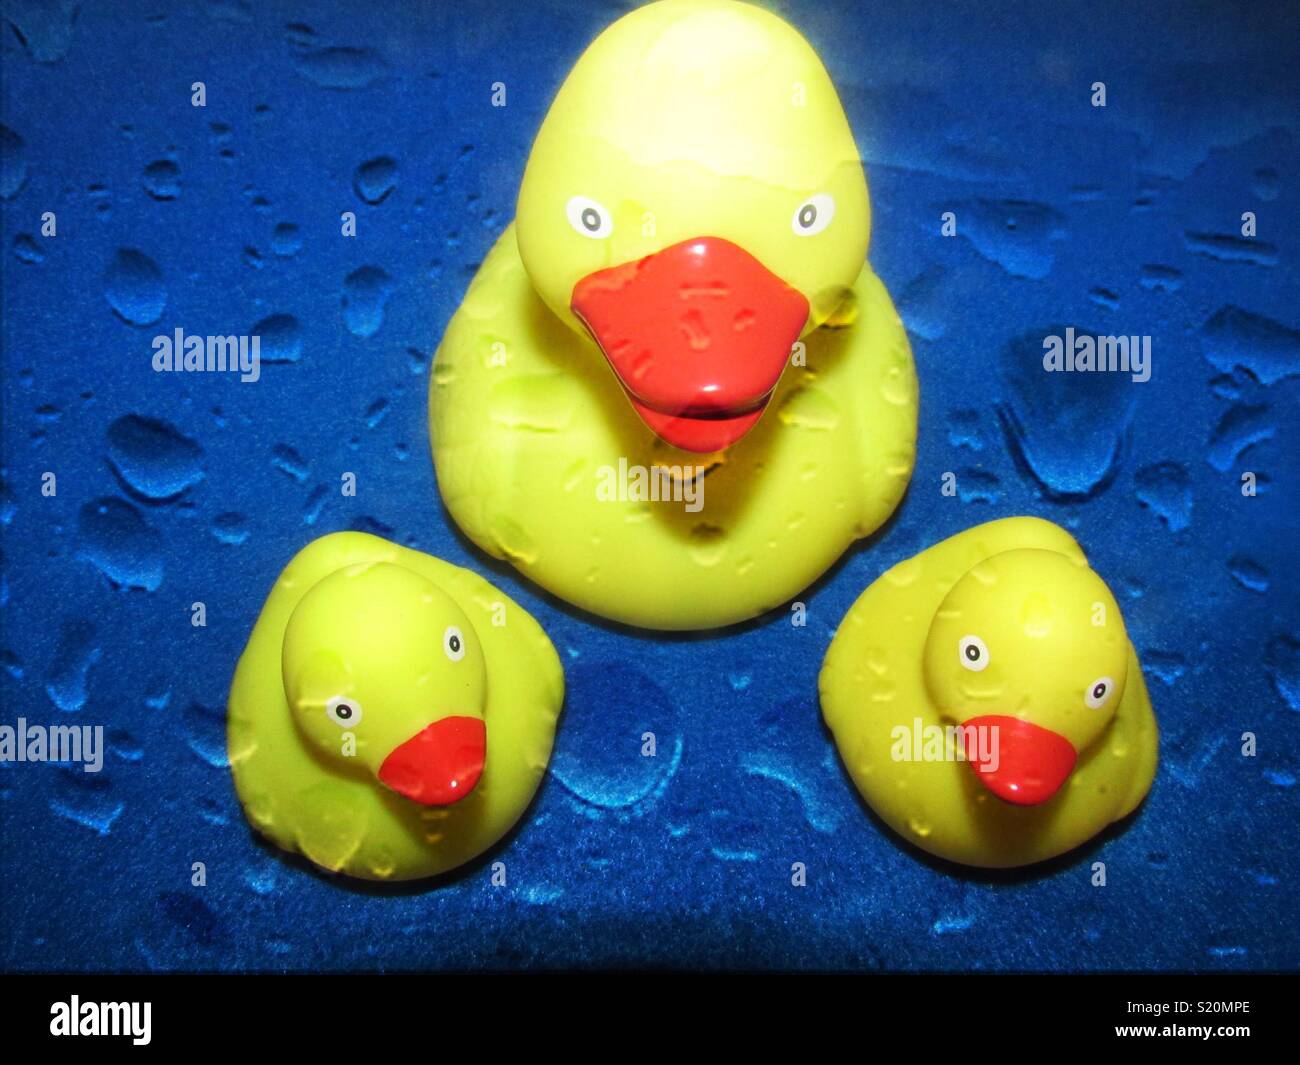 Rubber Duck family Stock Photo